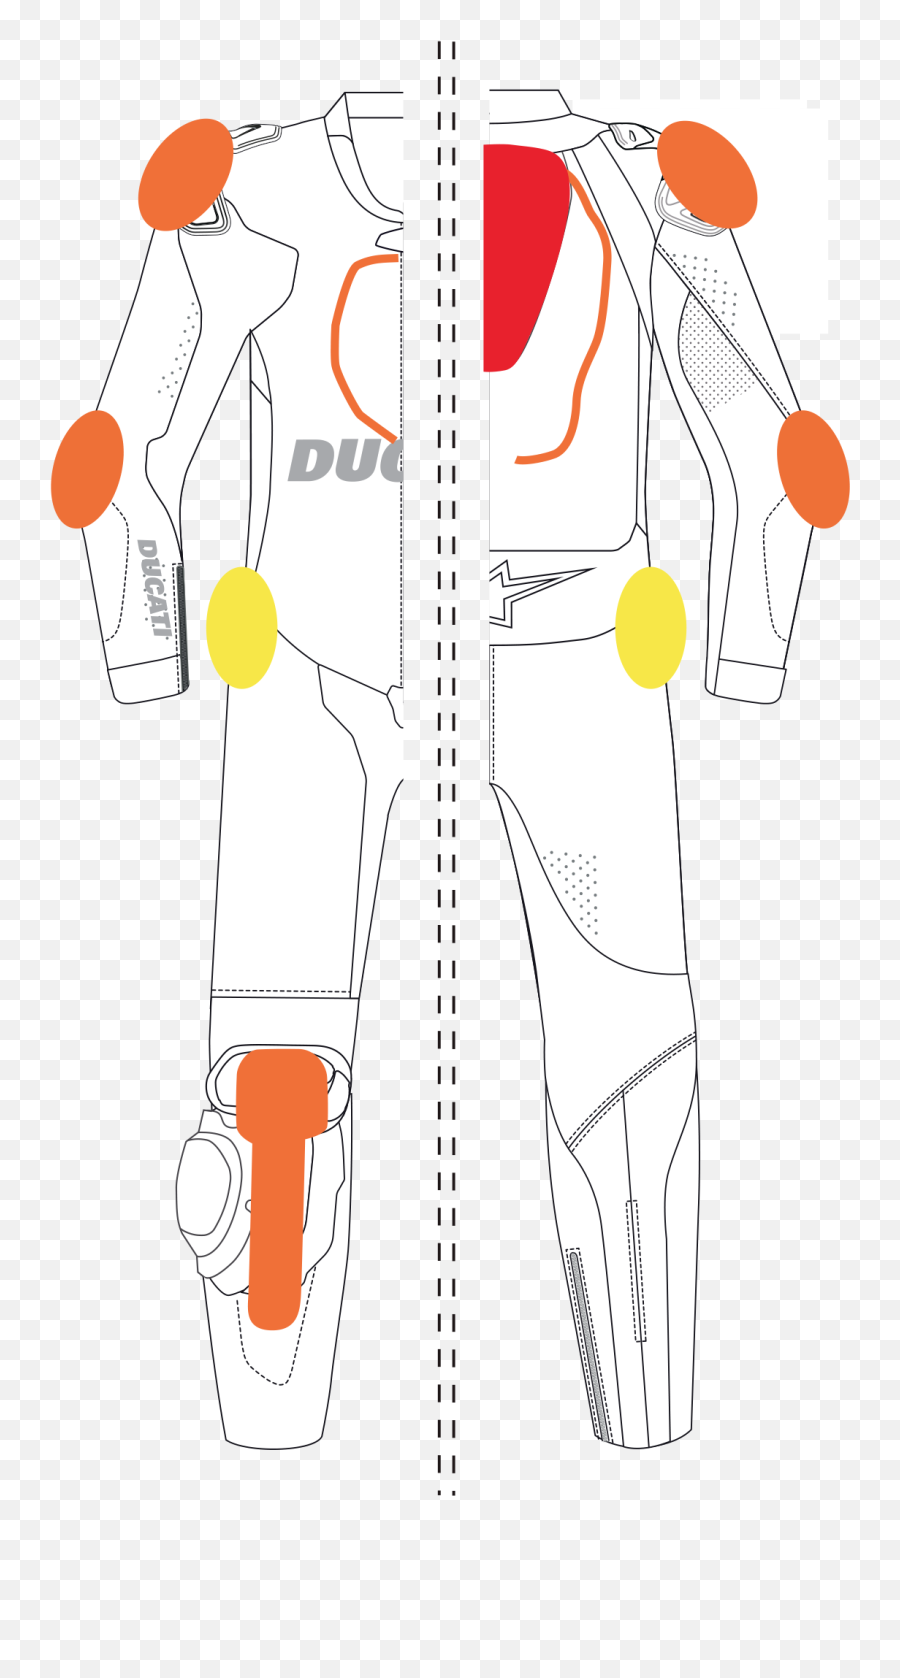 Replica Motogp 20 - Racing Suit Motorcycle Wear Apparel Drawing Png,Icon Motorcycle Leathers